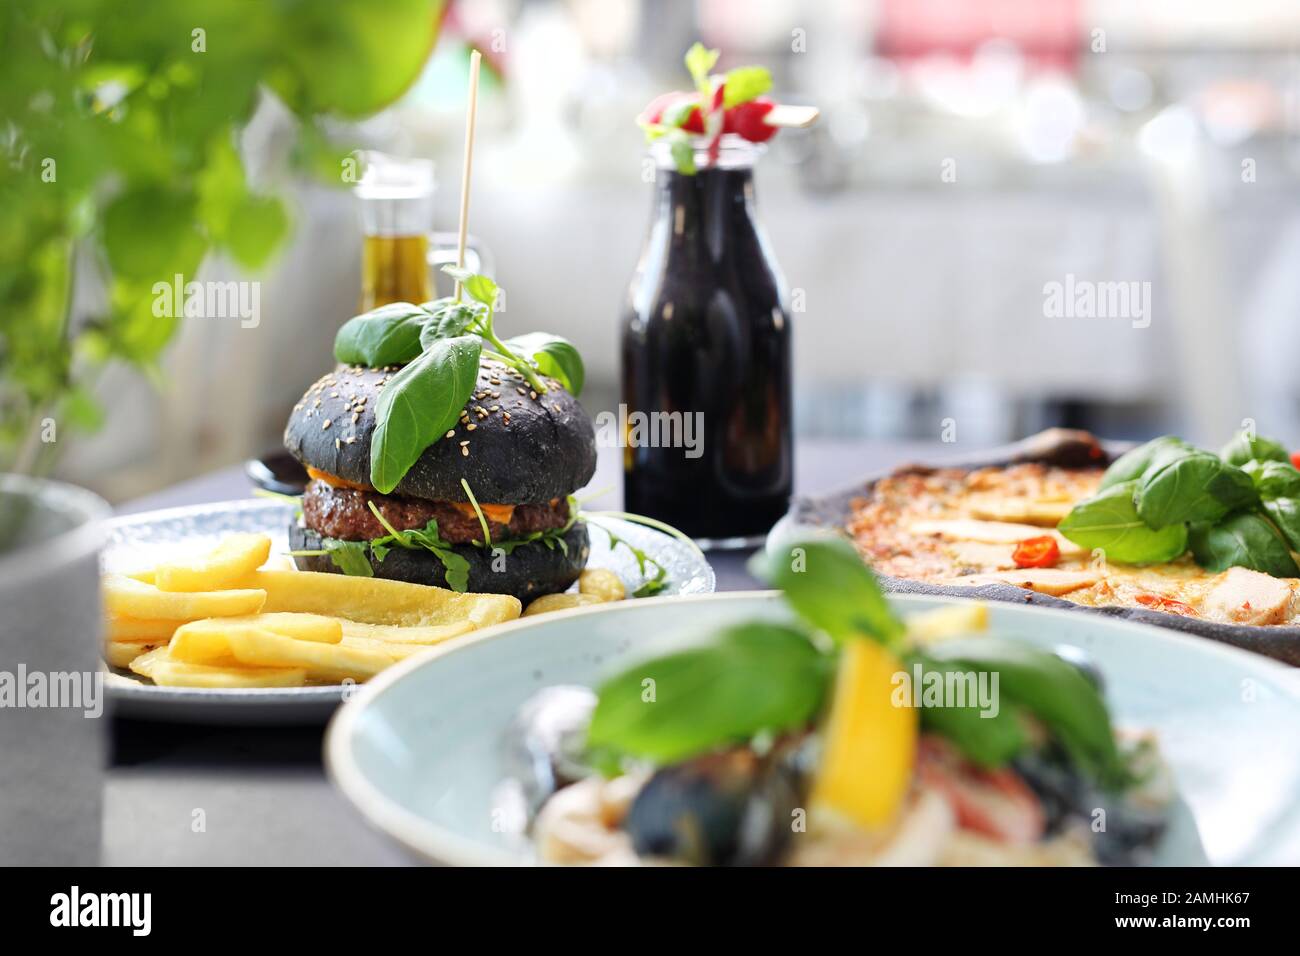 Black food. Burger, pizza, pasta, dishes with activated charcoal. Stock Photo